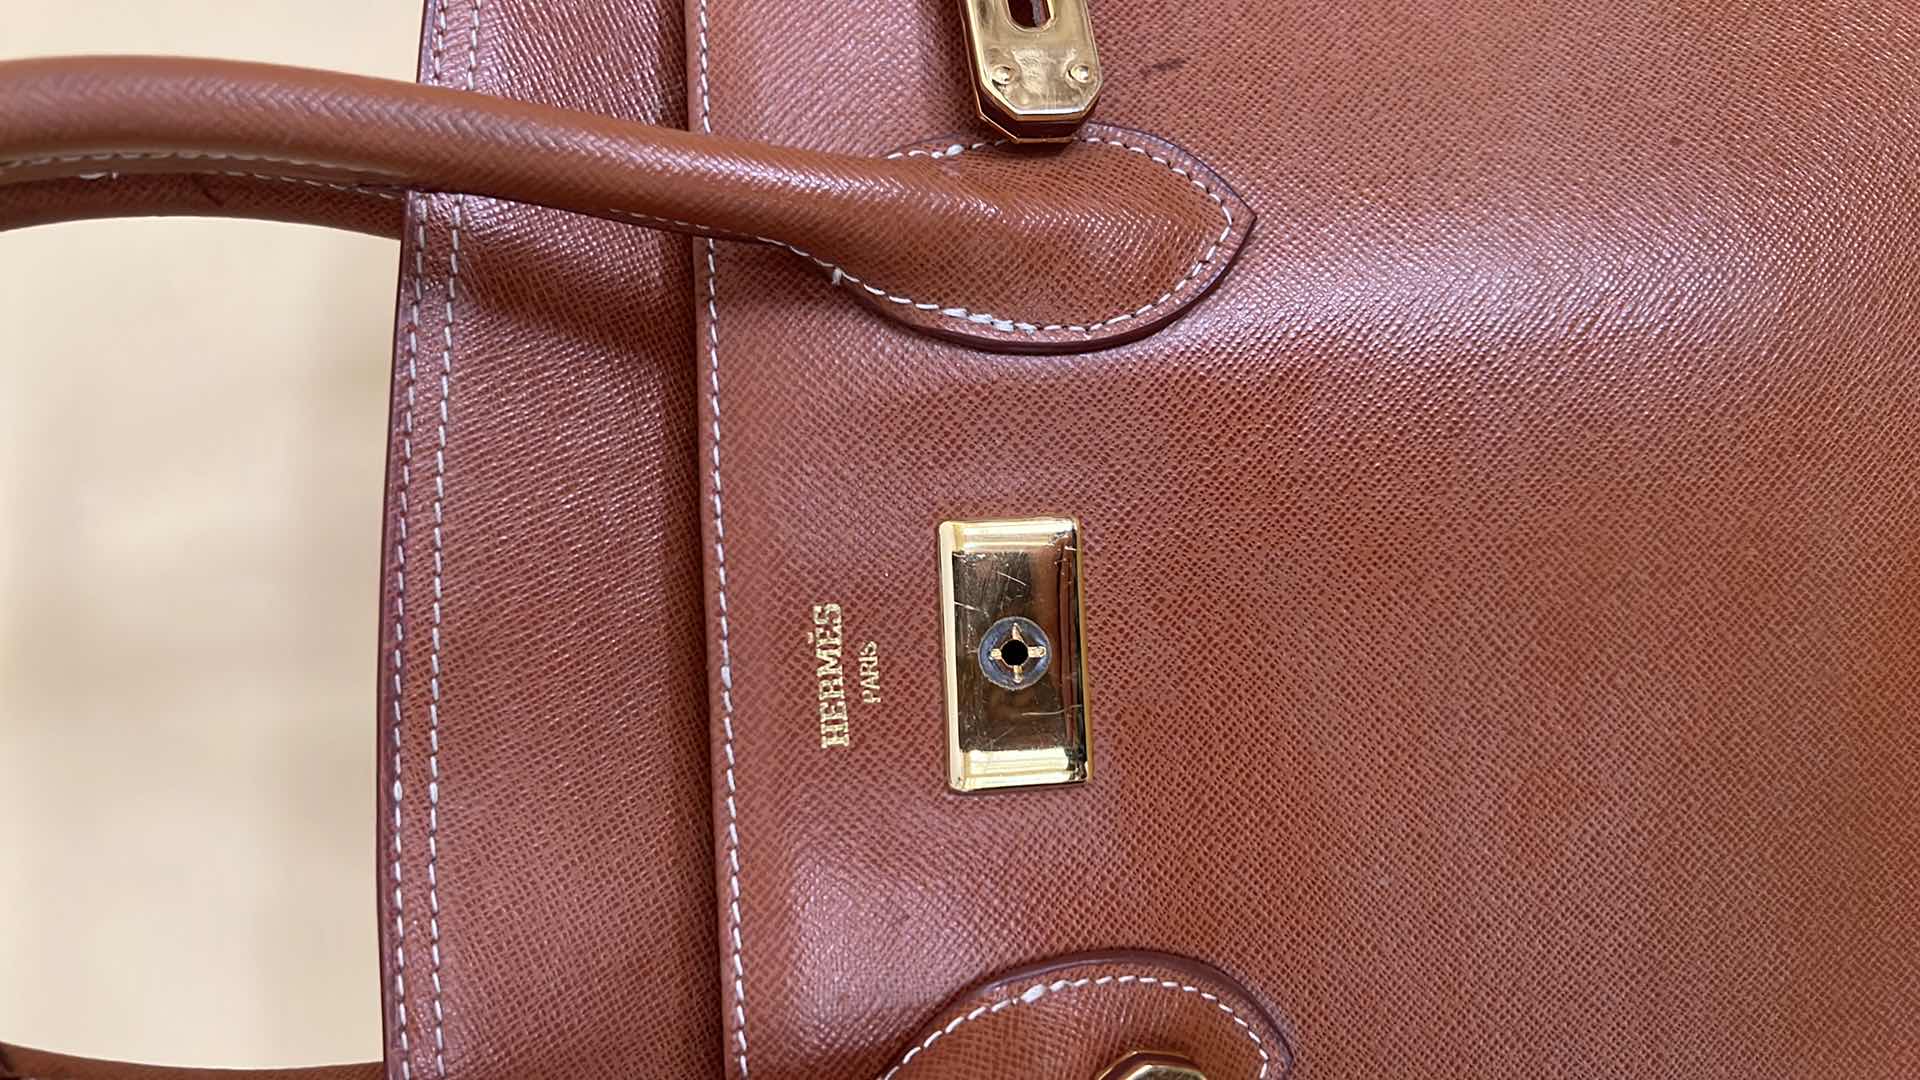 Photo 2 of TAN LEATHER HERMES LABEL HANDBAG (NOT AUTHENTIC)